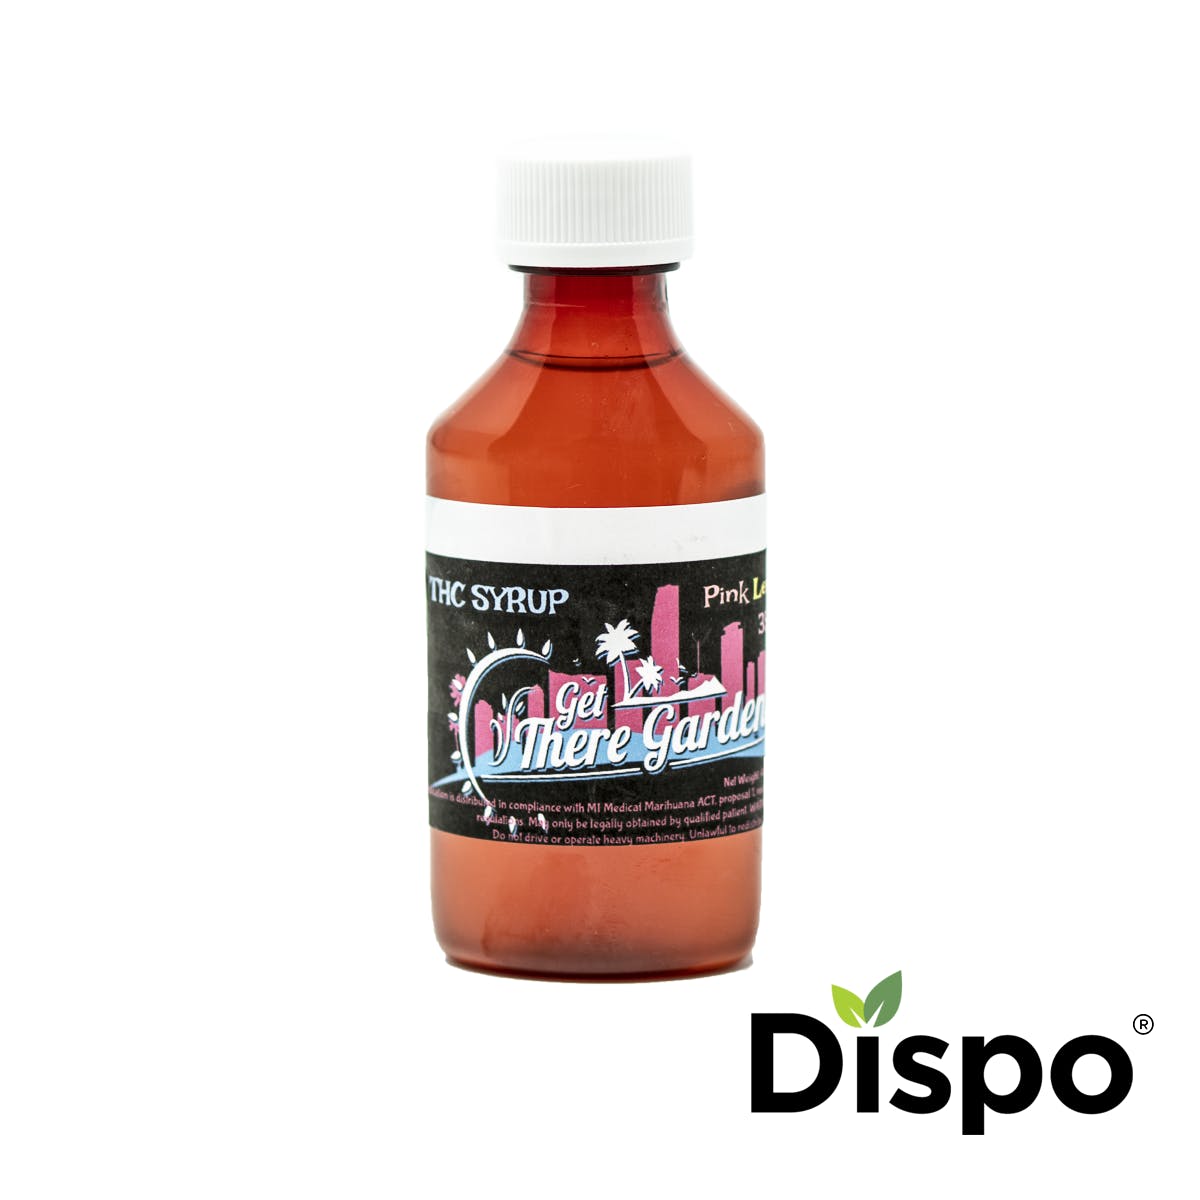 marijuana-dispensaries-dispo-in-bay-city-get-there-gardens-thc-syrup